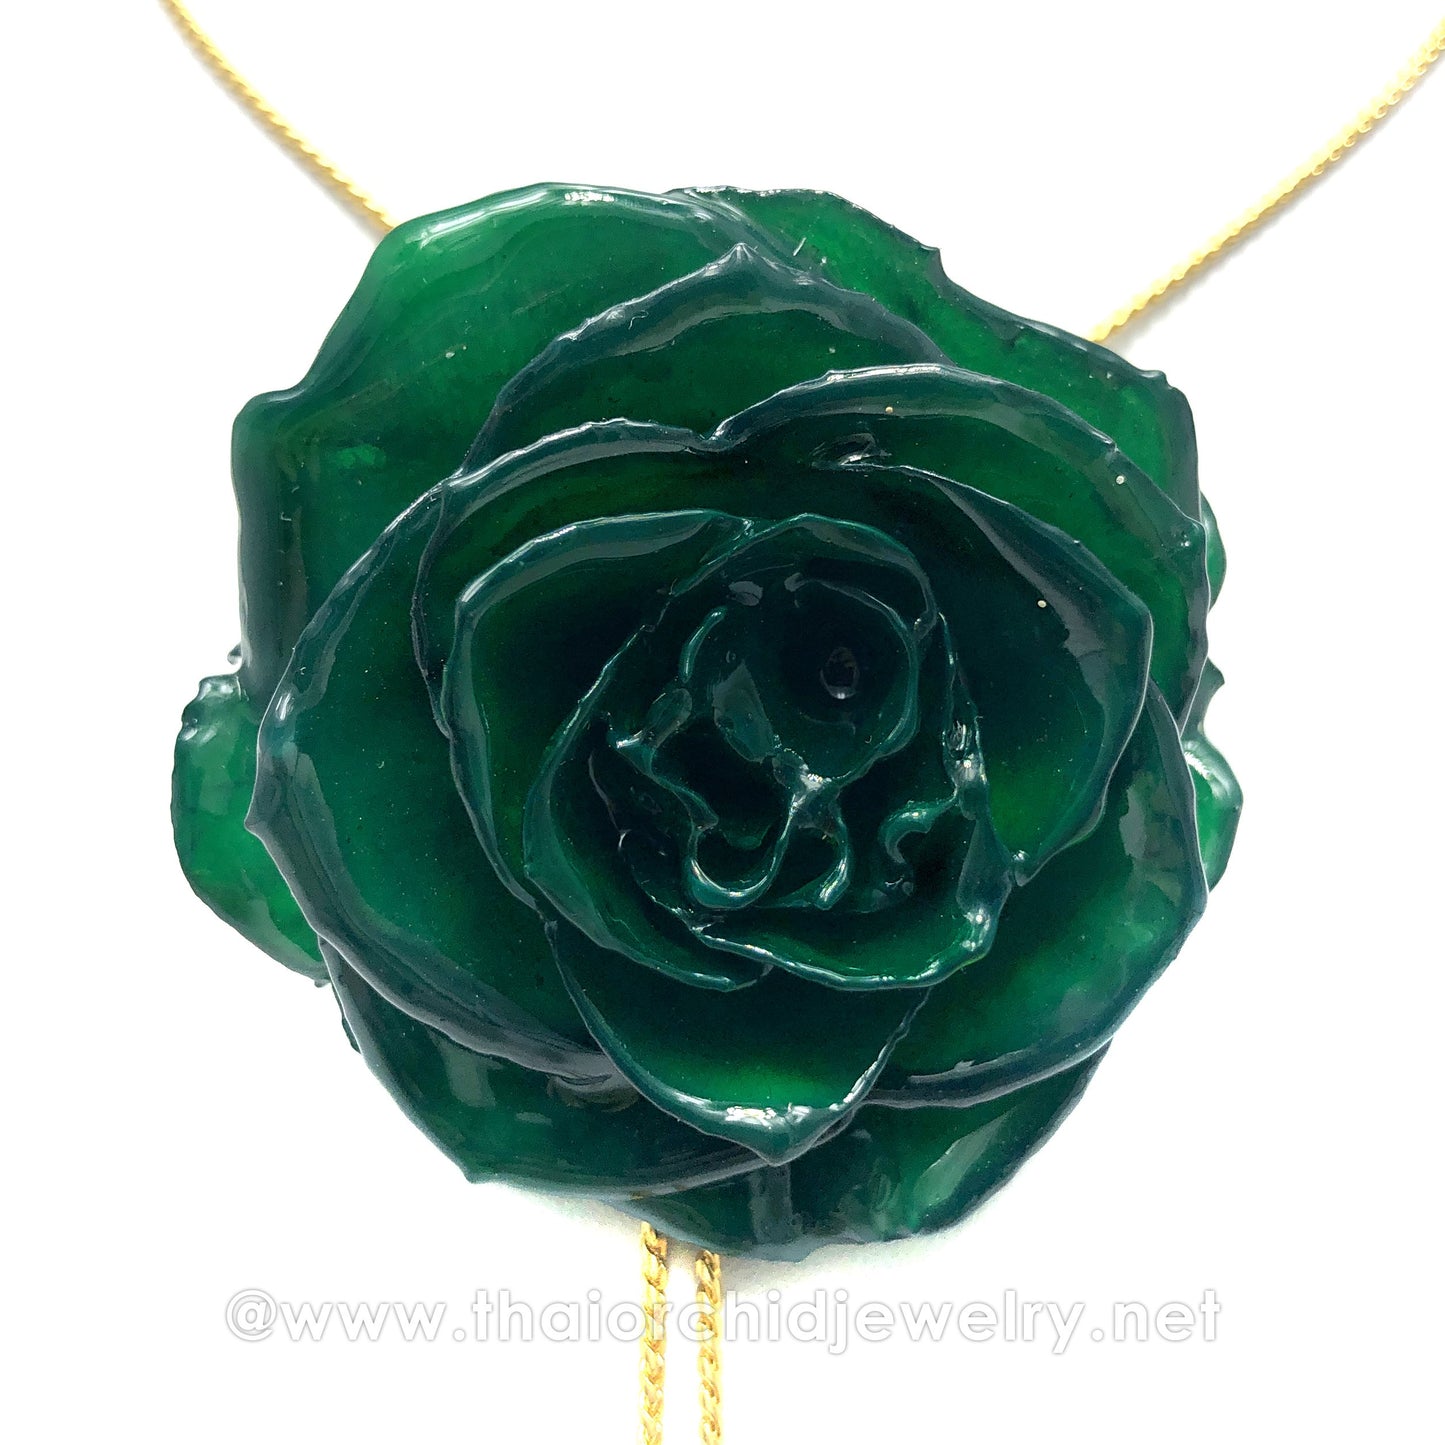 Mini Rose Mini 1.5-2.25 inch Pendant Necklace 18 inch Gold Plated 24K (Green)